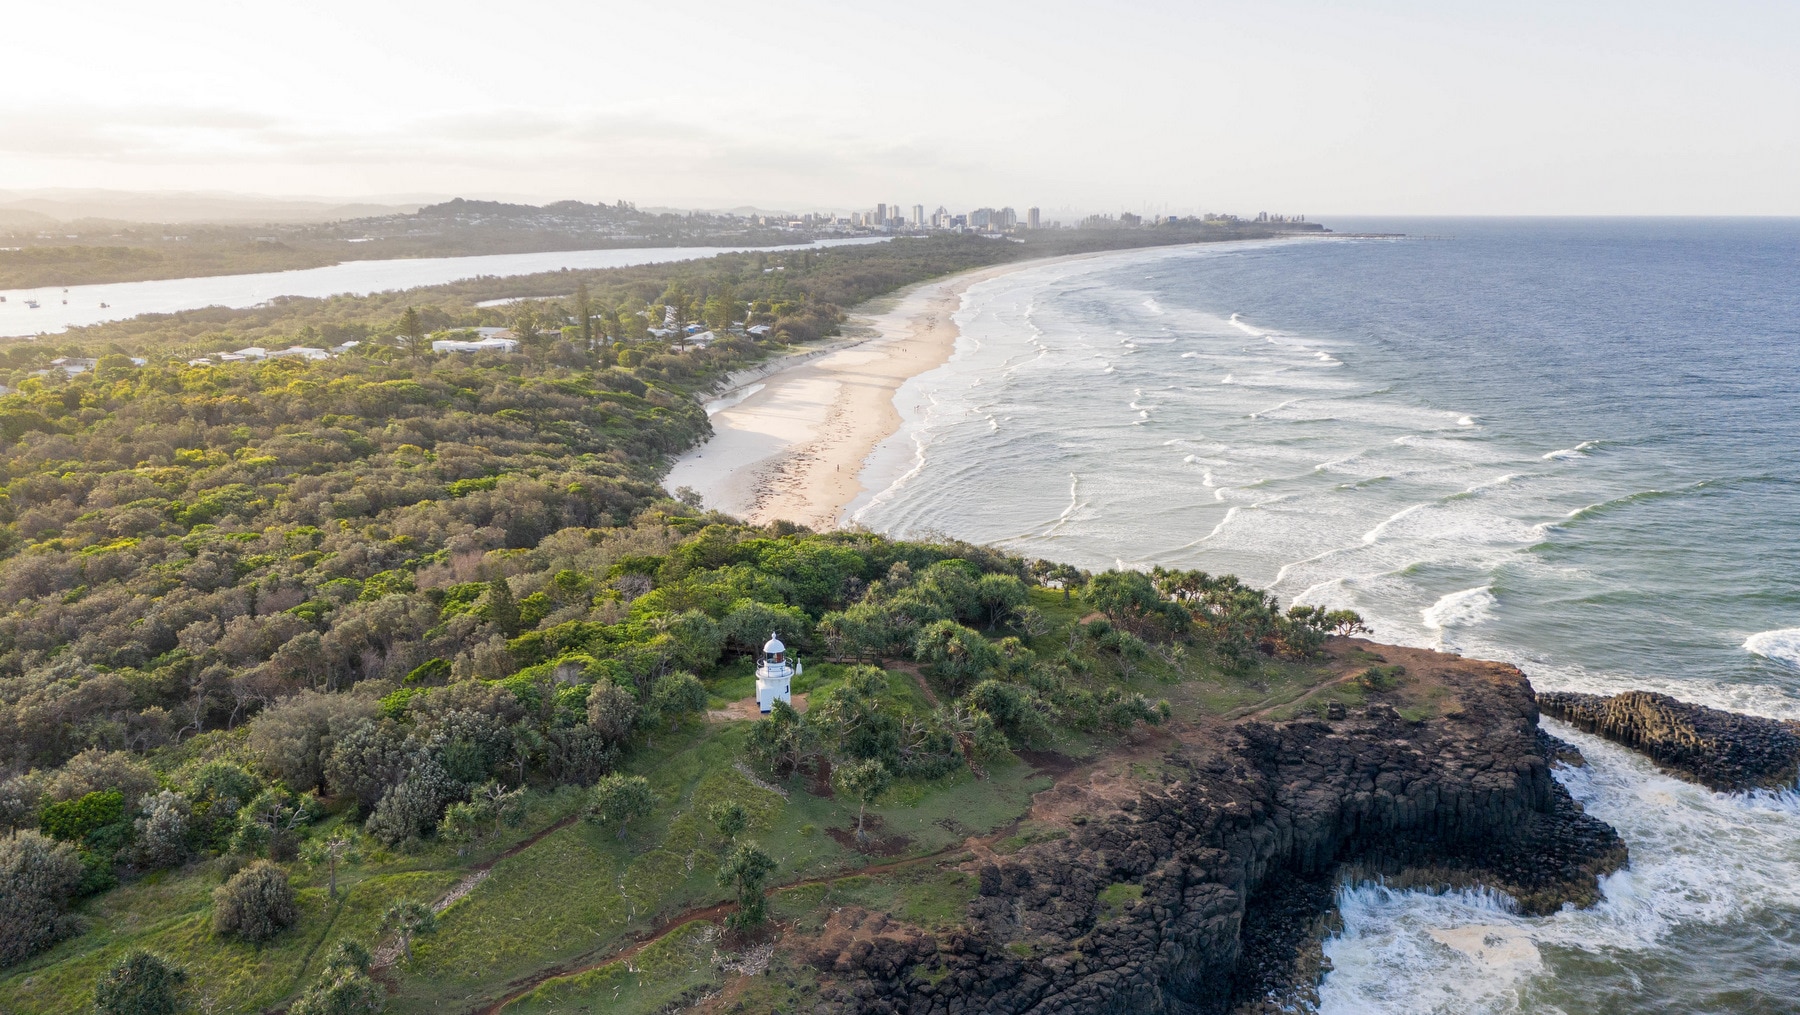 Fingal Head point lighthouse with view over the Gold Coast.